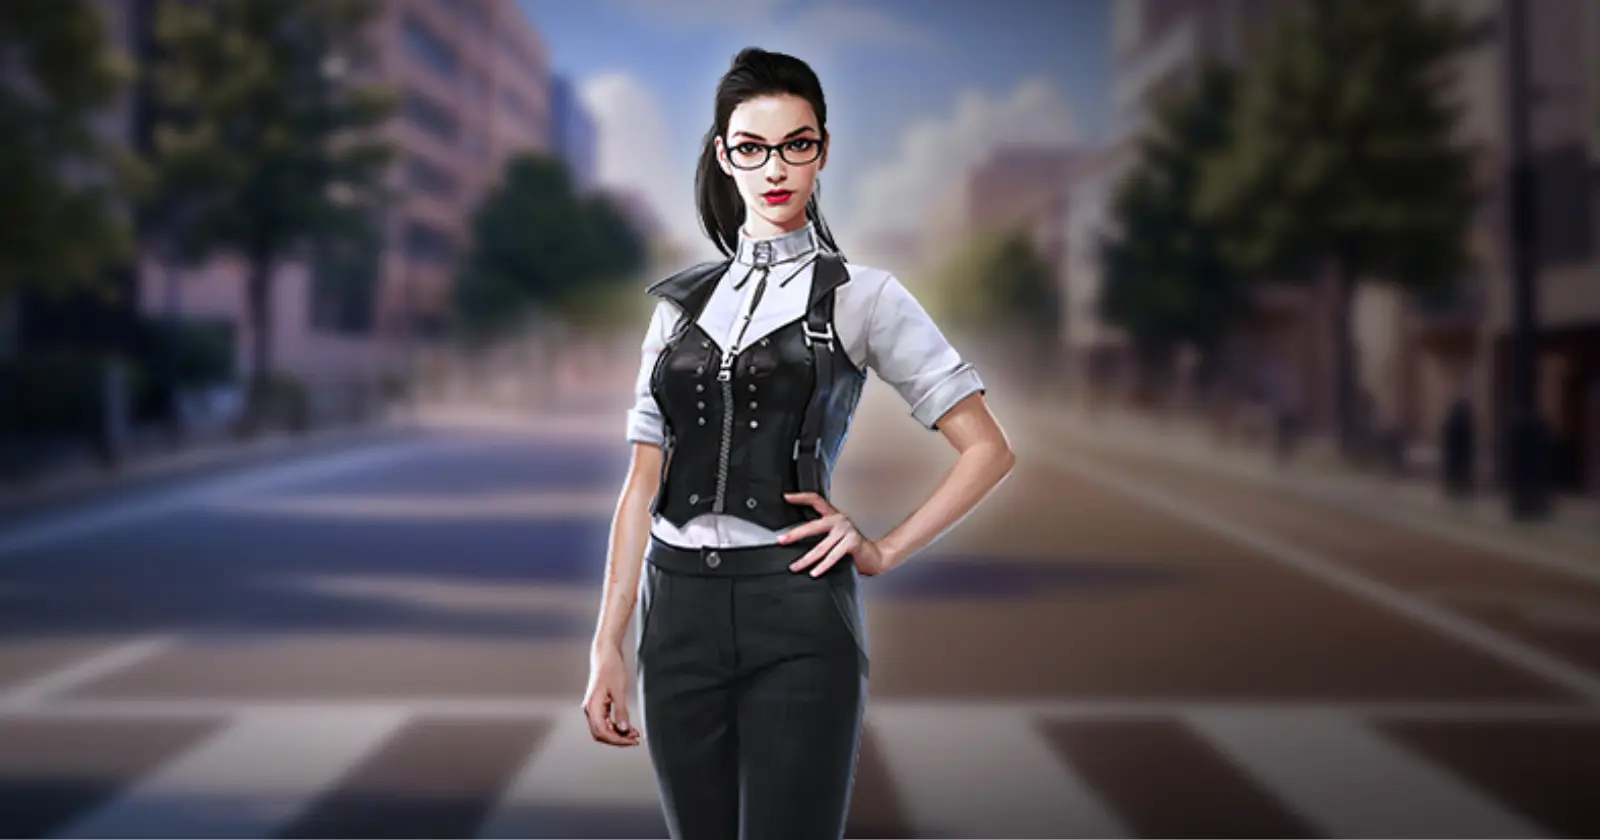 Nikita in chic black and white attire, donning glasses, confidently poses with hands on waist amidst a city street